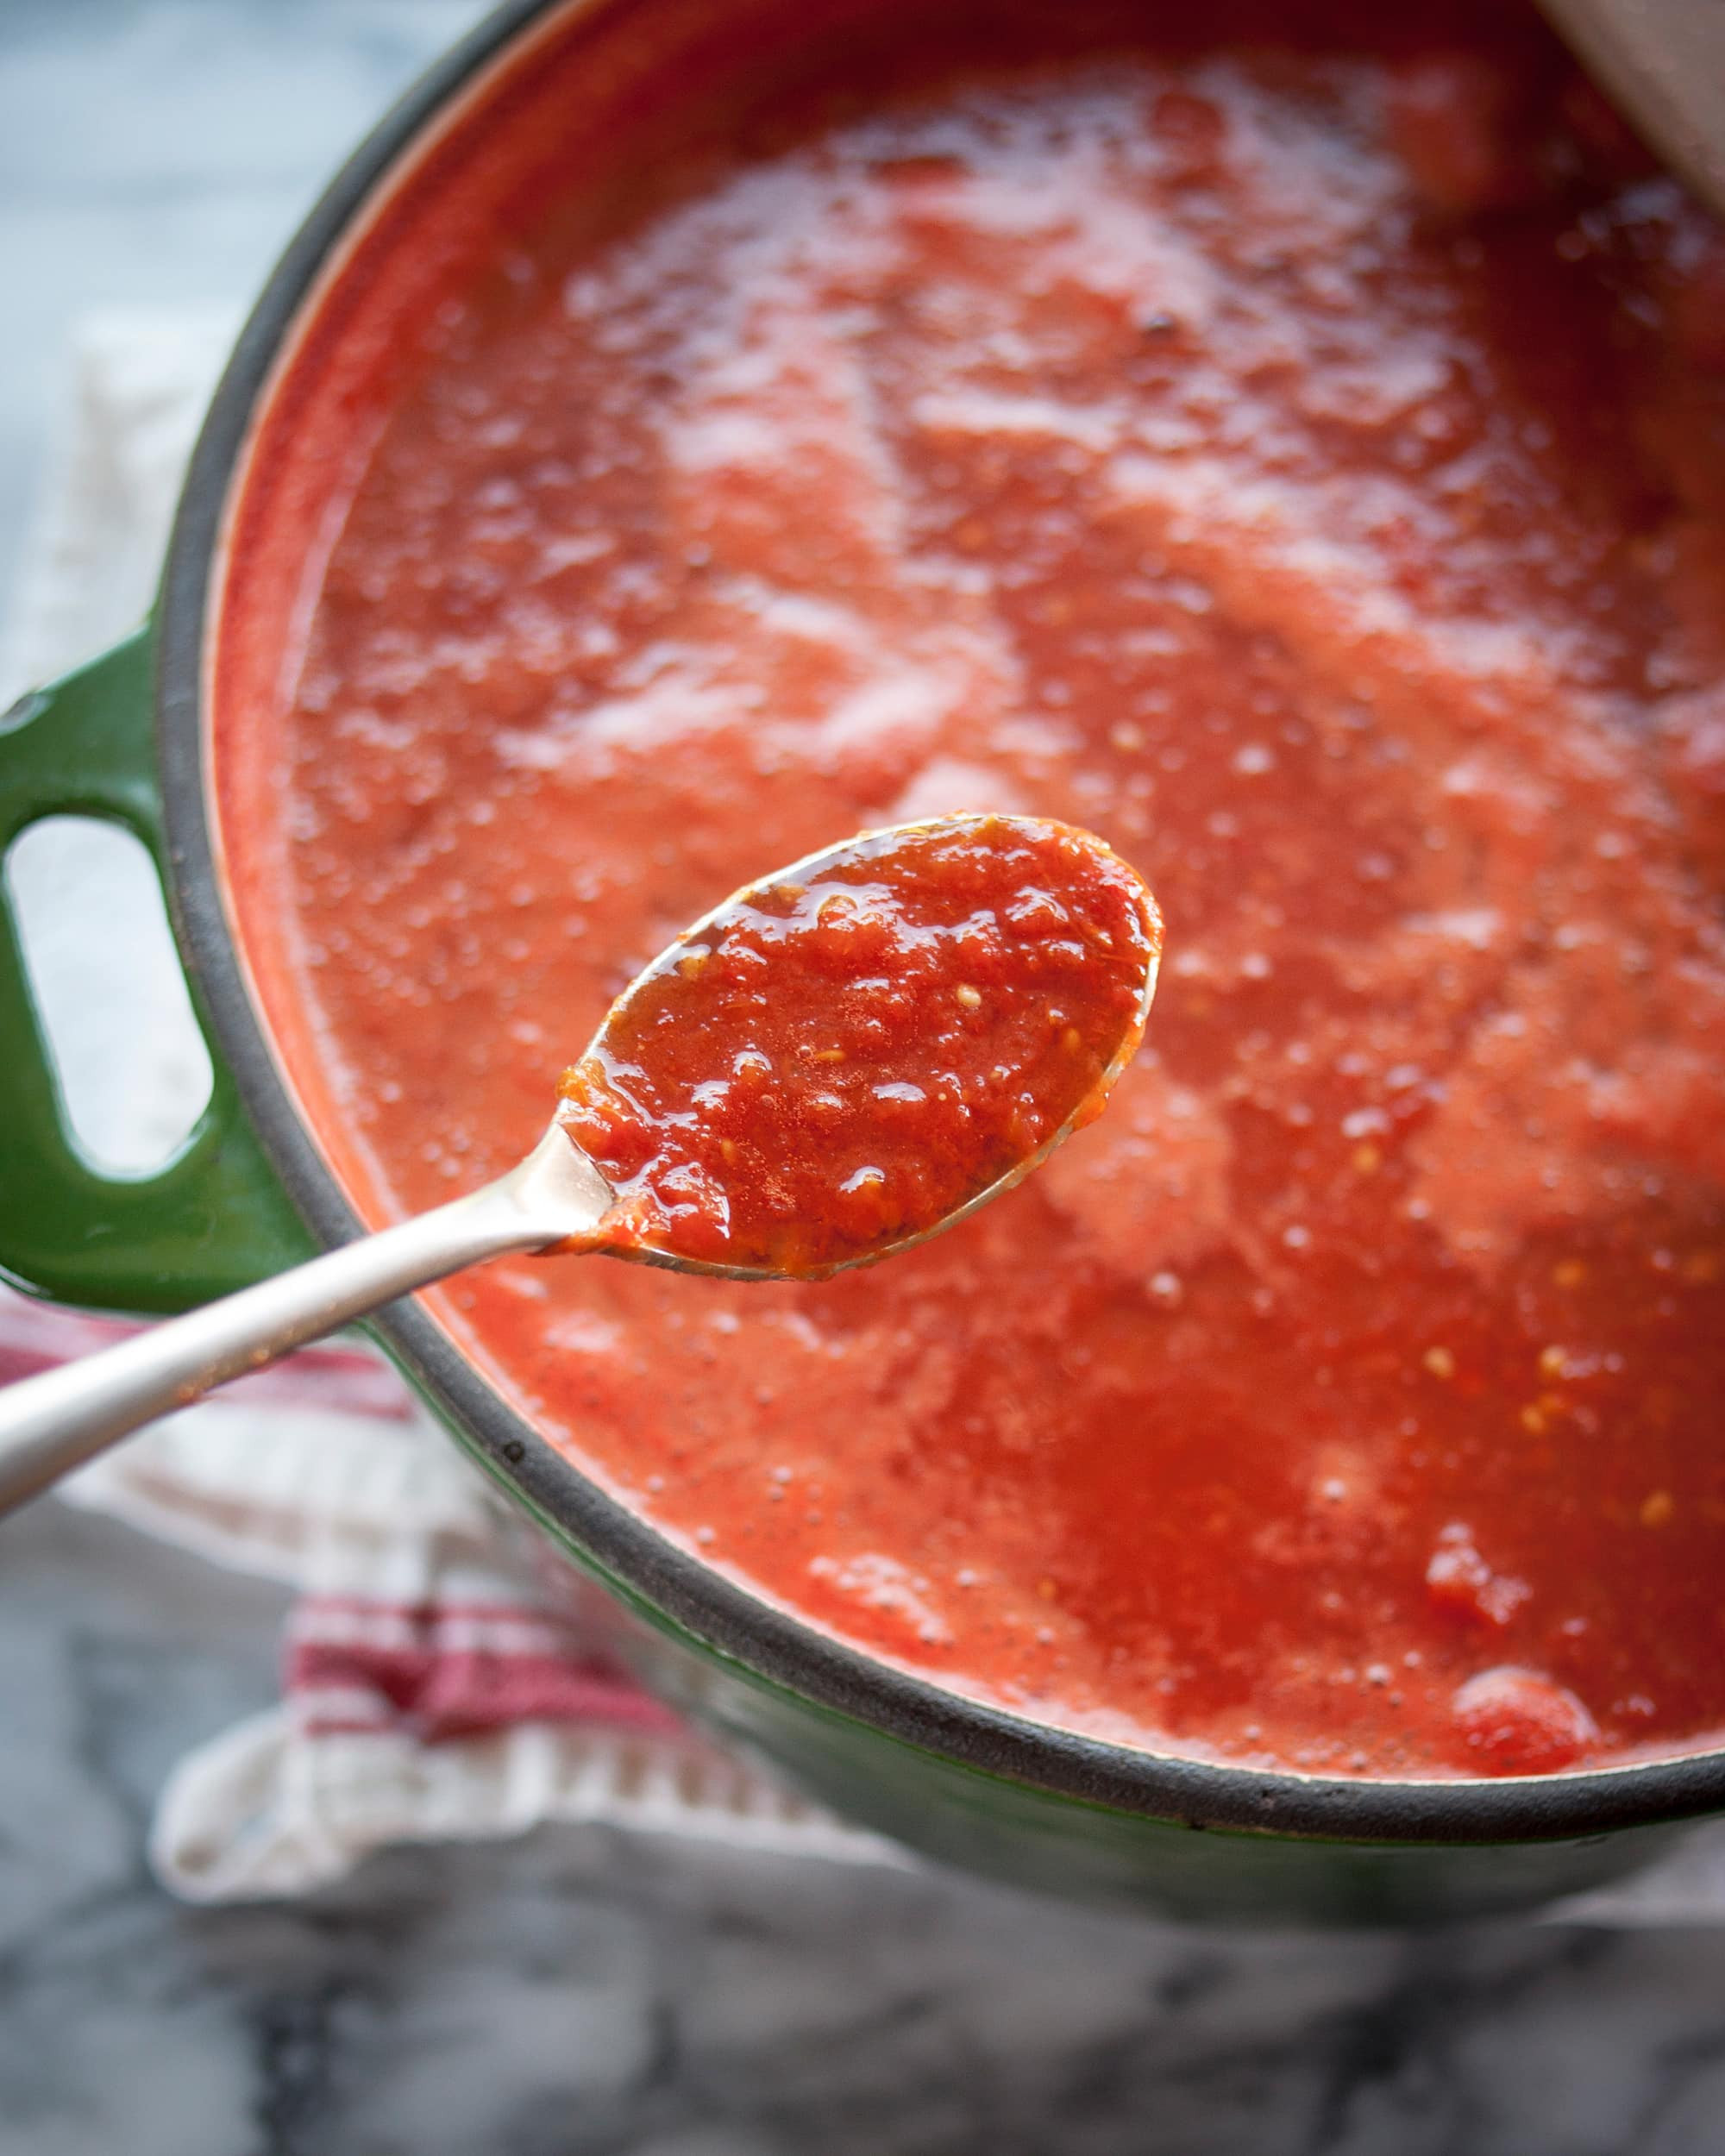 Tomato Sauce From Fresh Tomatoes
 How To Make Tomato Sauce with Fresh Tomatoes